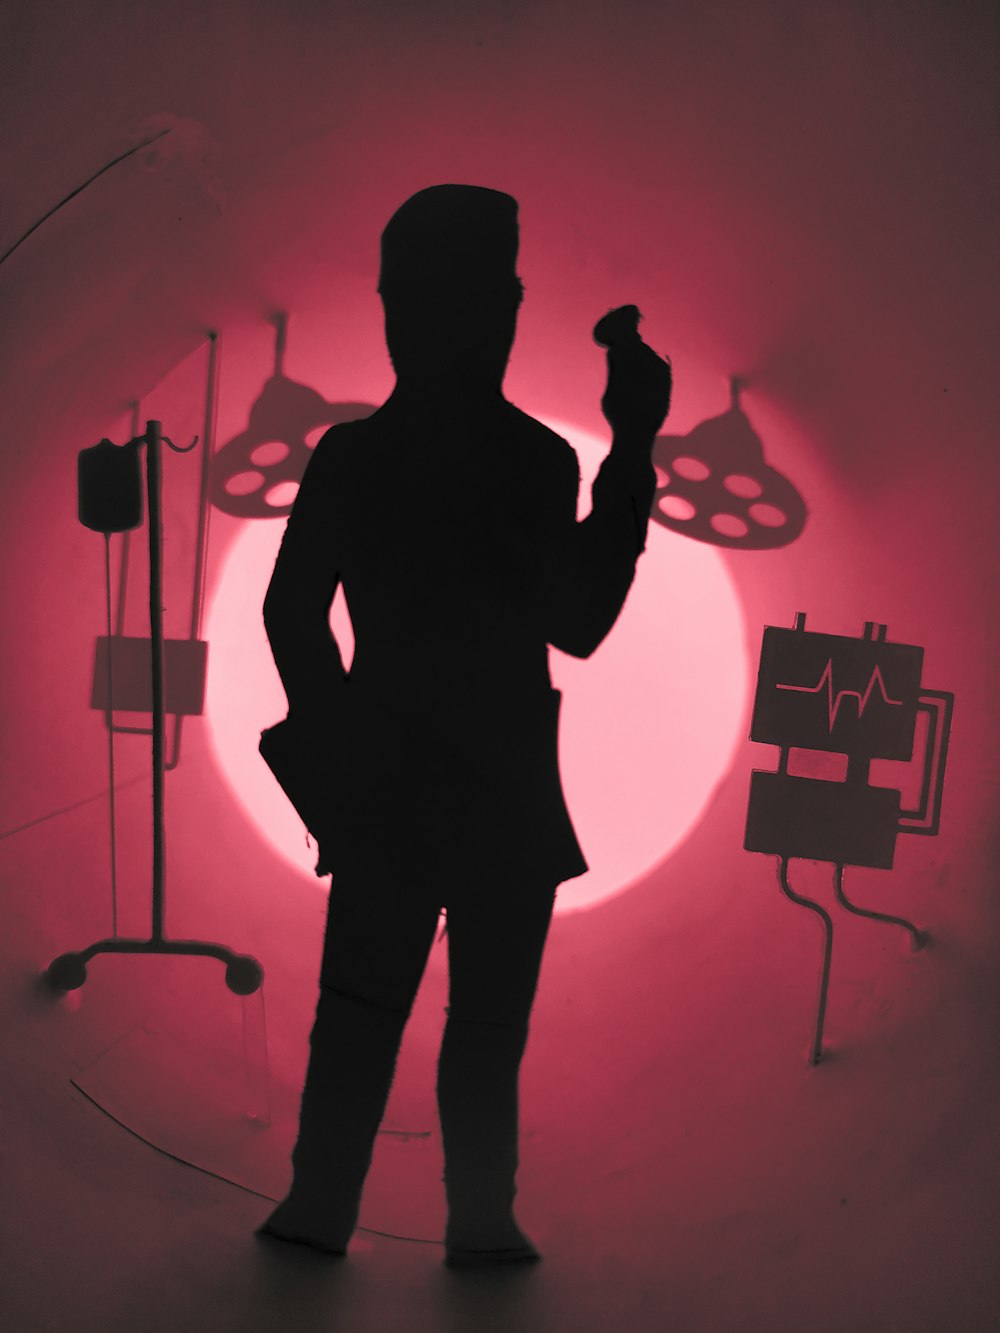 a silhouette of a person standing in front of a red light